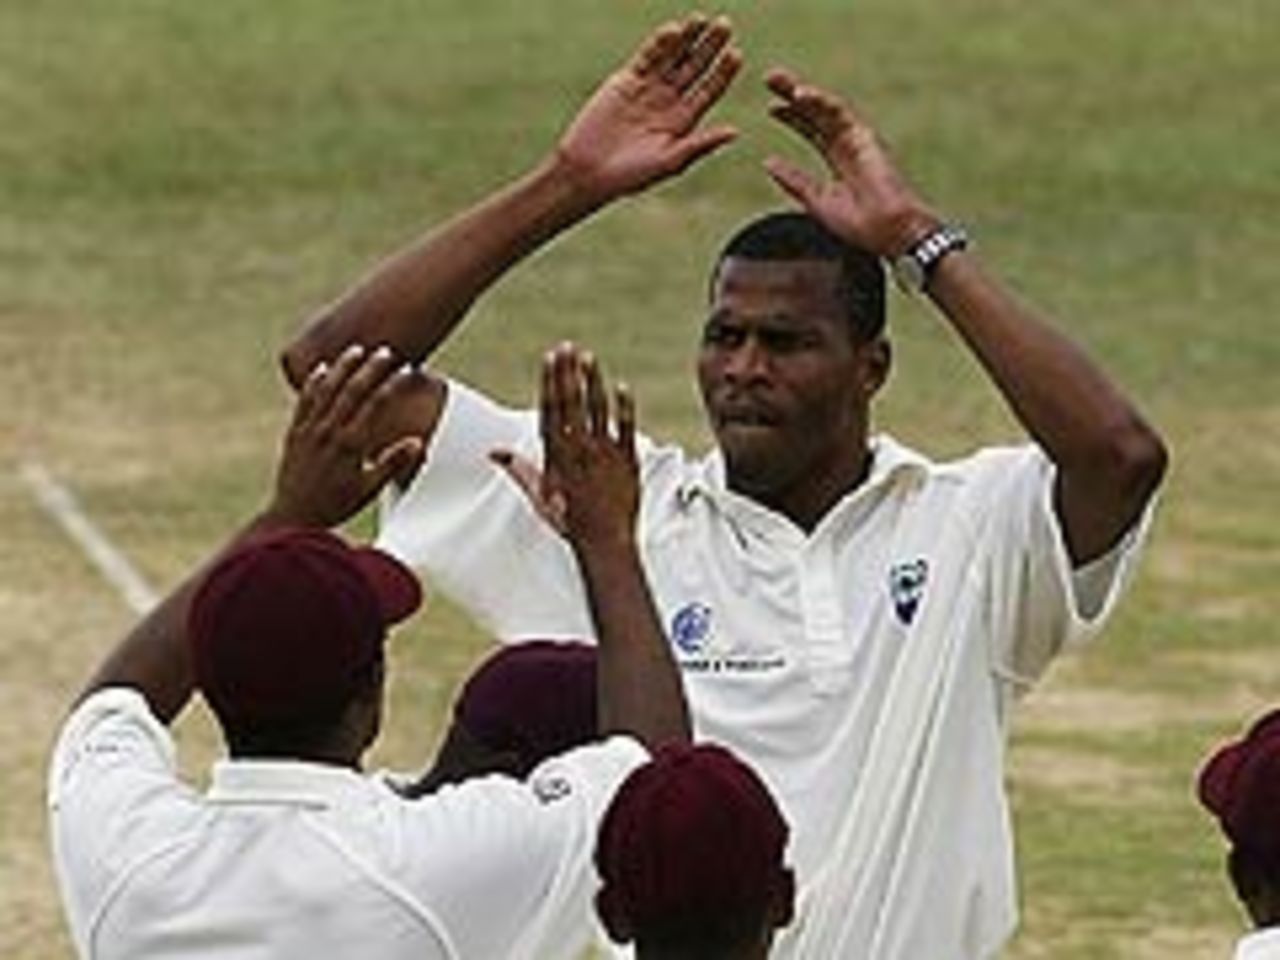 Merv Dillon celebrates the early wicket of Hayden, 2nd Test, Australia v West Indies at Trinidad, April 19, 2003